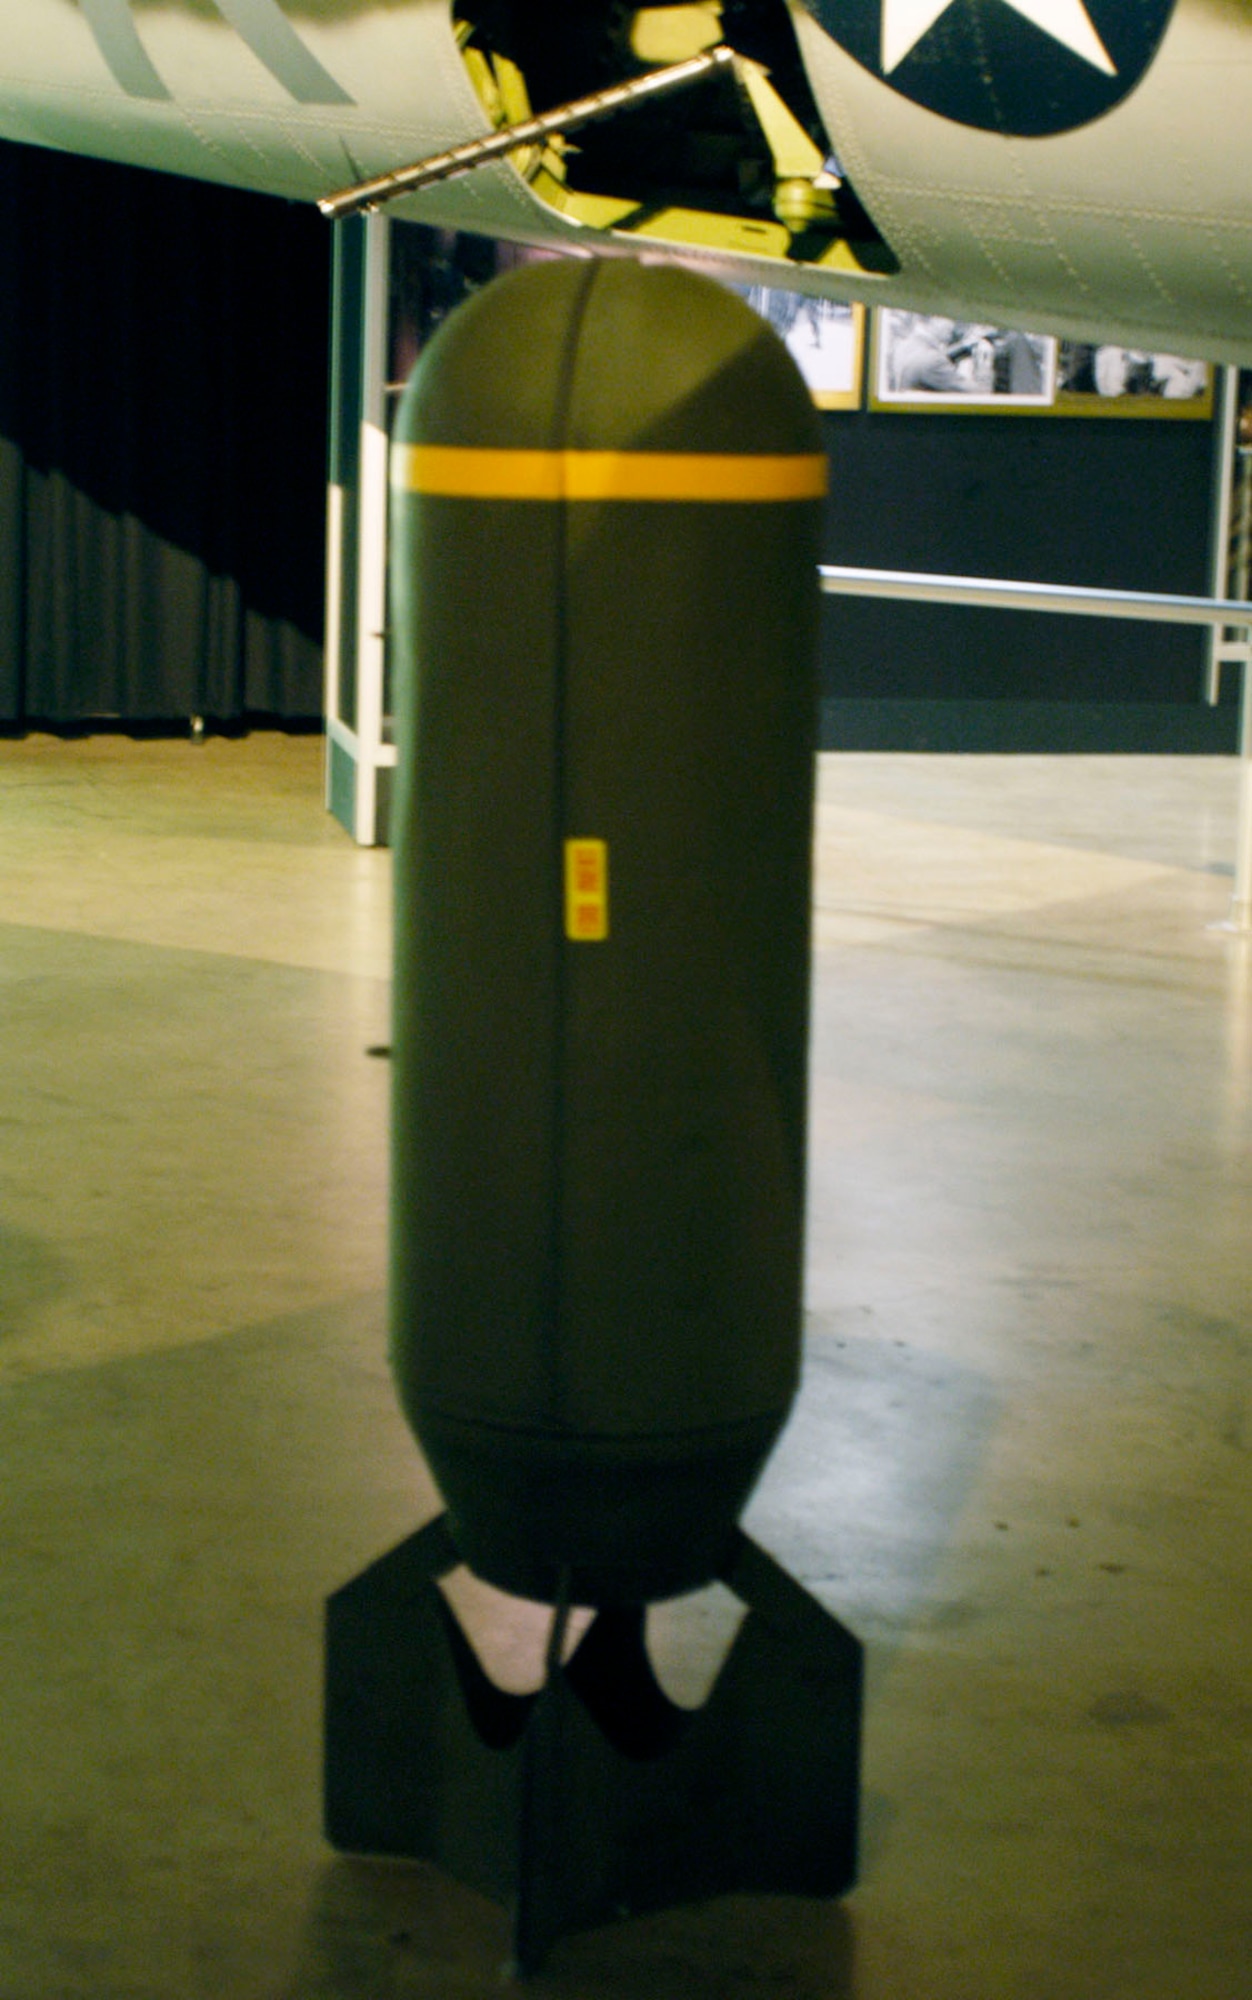 DAYTON, Ohio -- M29 Cluster Bomb in the World War II Gallery at the National Museum of the U.S. Air Force. (U.S. Air Force photo)